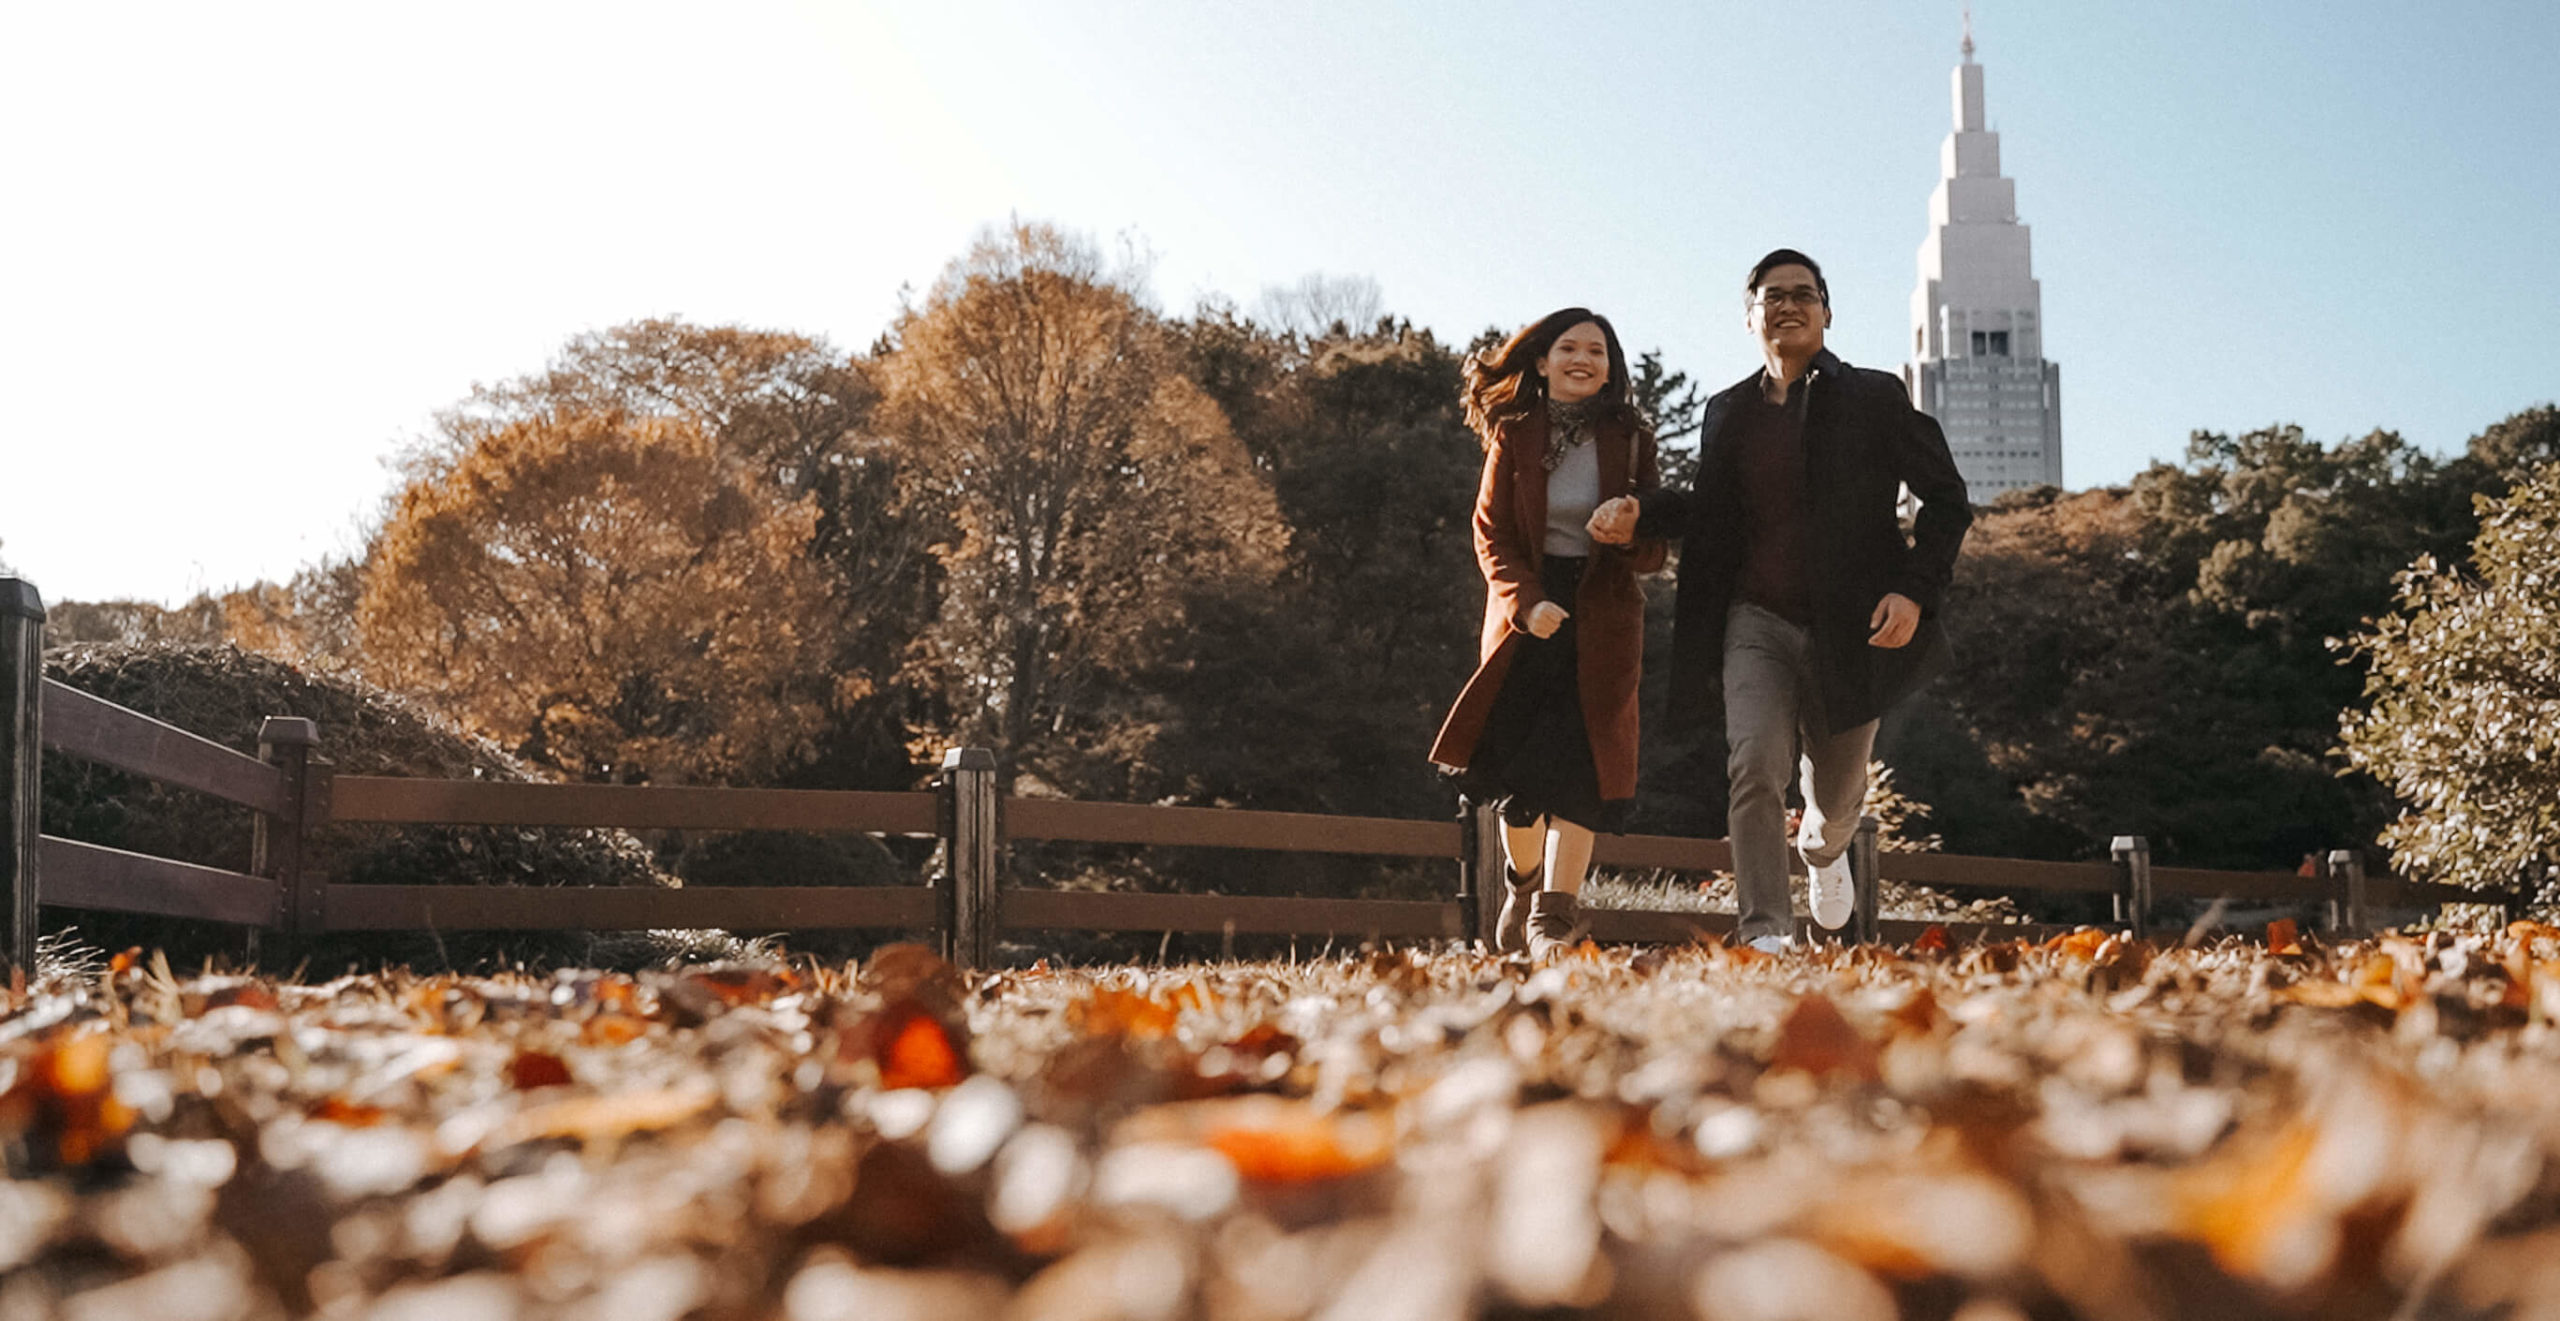 From Derwin and Issa's Japan Pre Wedding https://youtu.be/N0f-cBrE-Lc